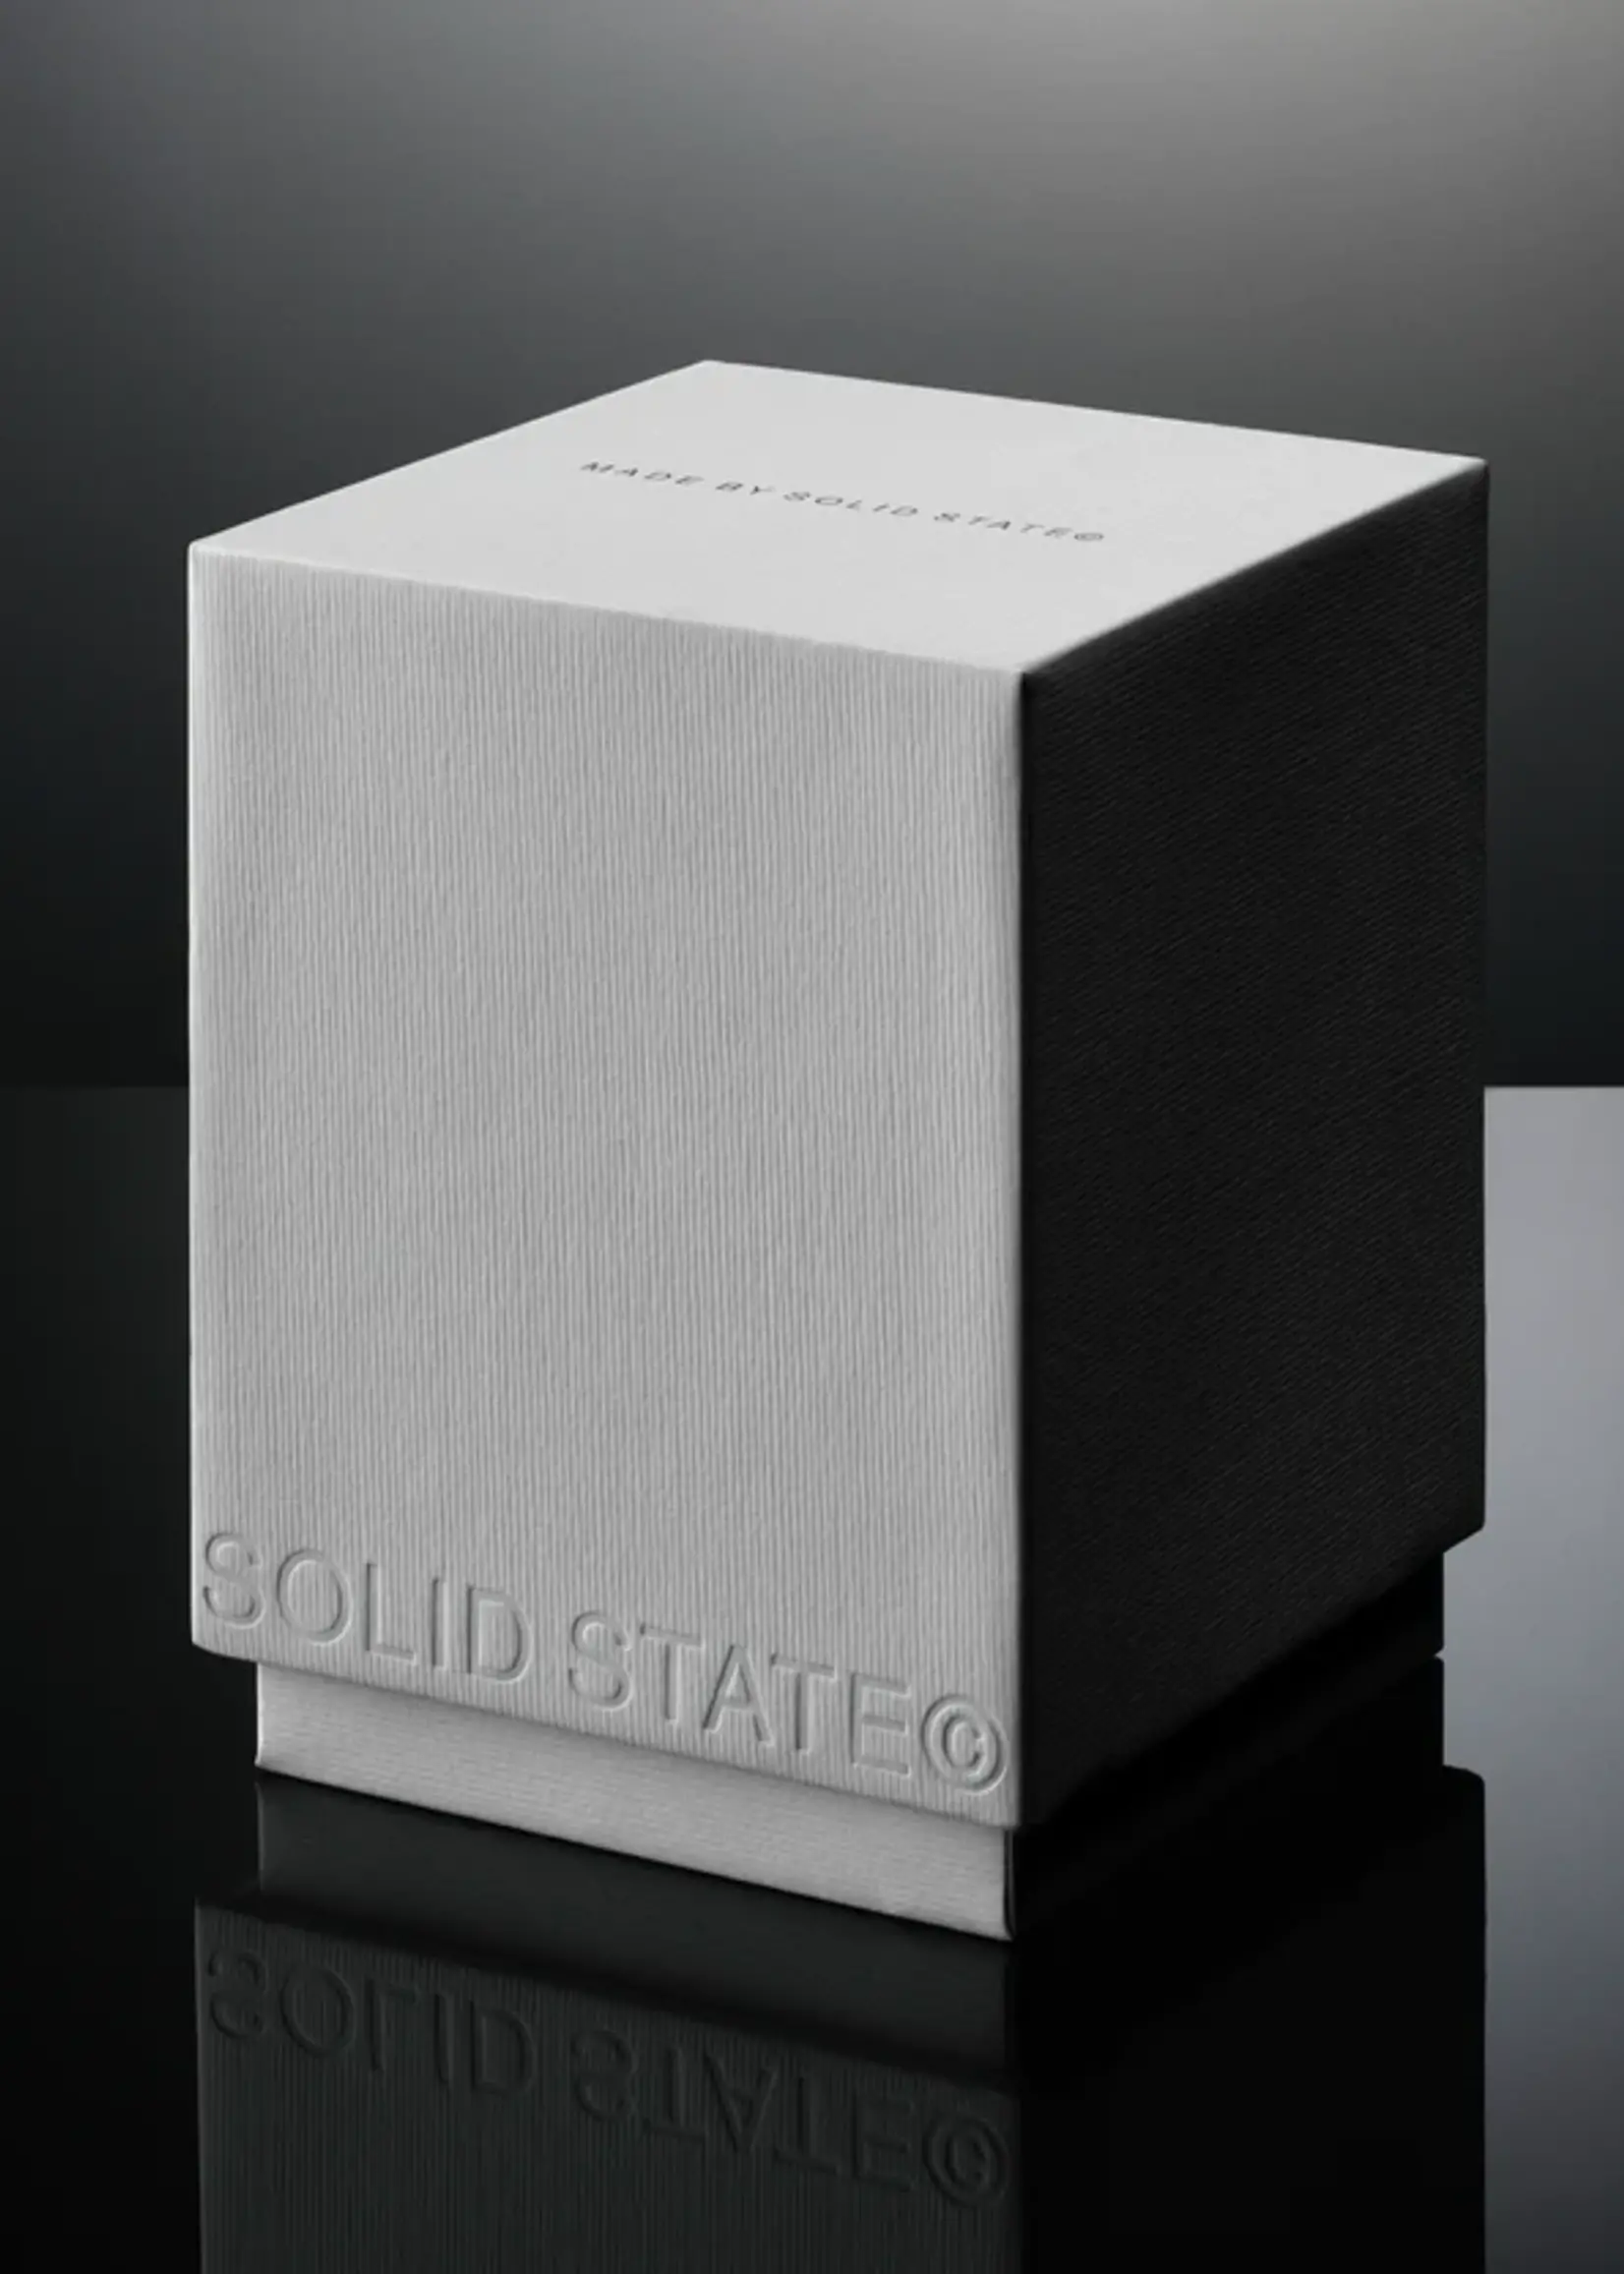 Solid State - Icon EDP